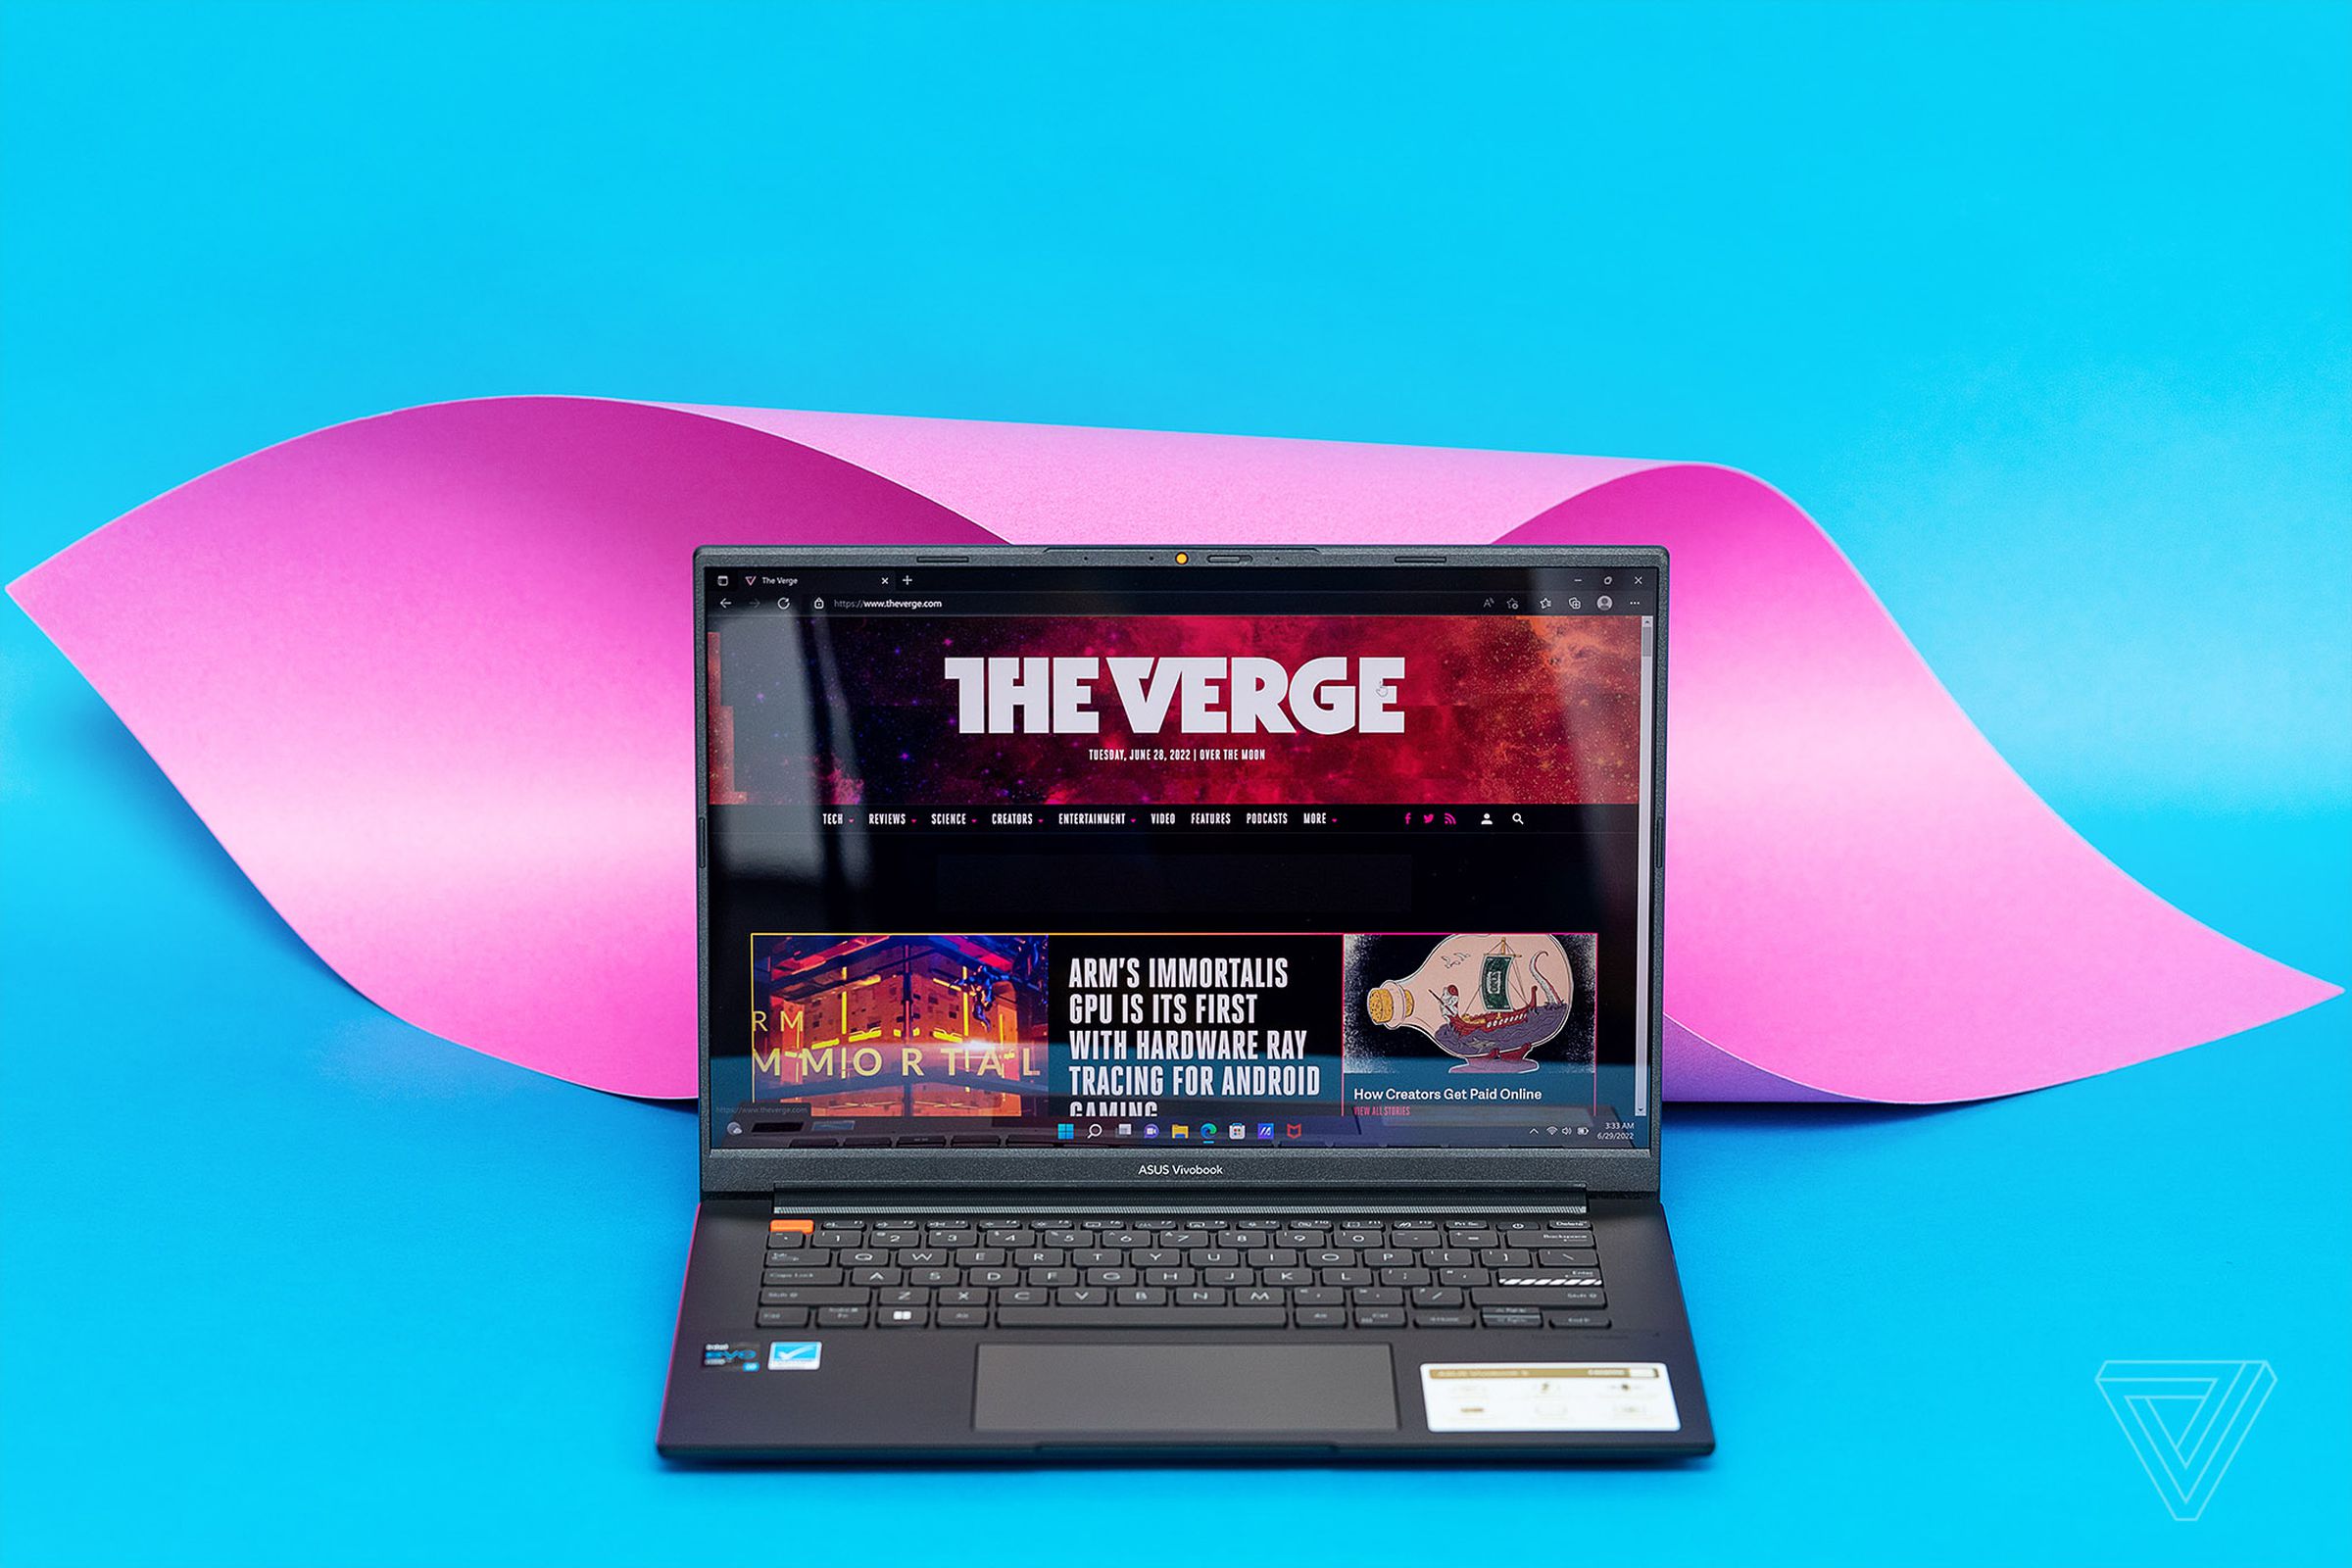 The Asus Vivobook S 14X seen from above on a blue and pink surface. The screen displays The Verge homepage.